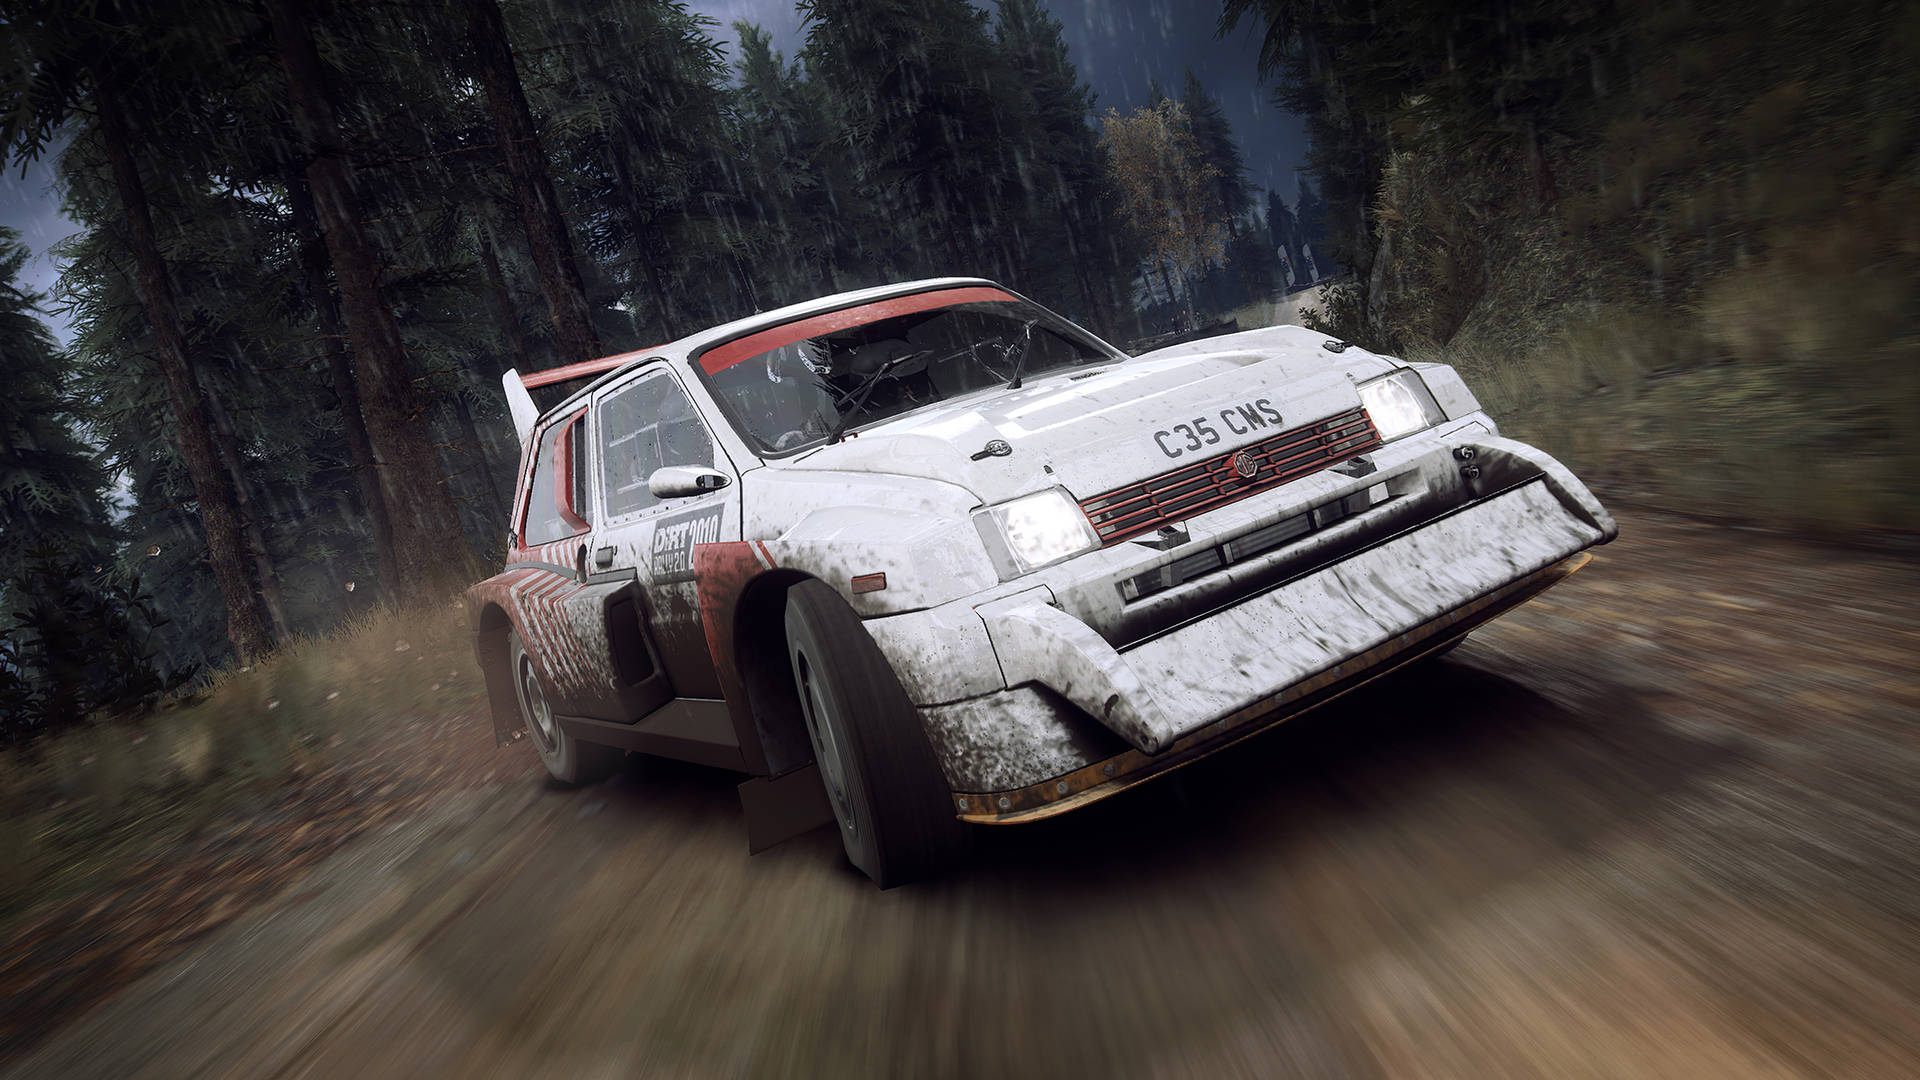 Intense Racing Action With Dirt Rally's Mg Metro 6r4